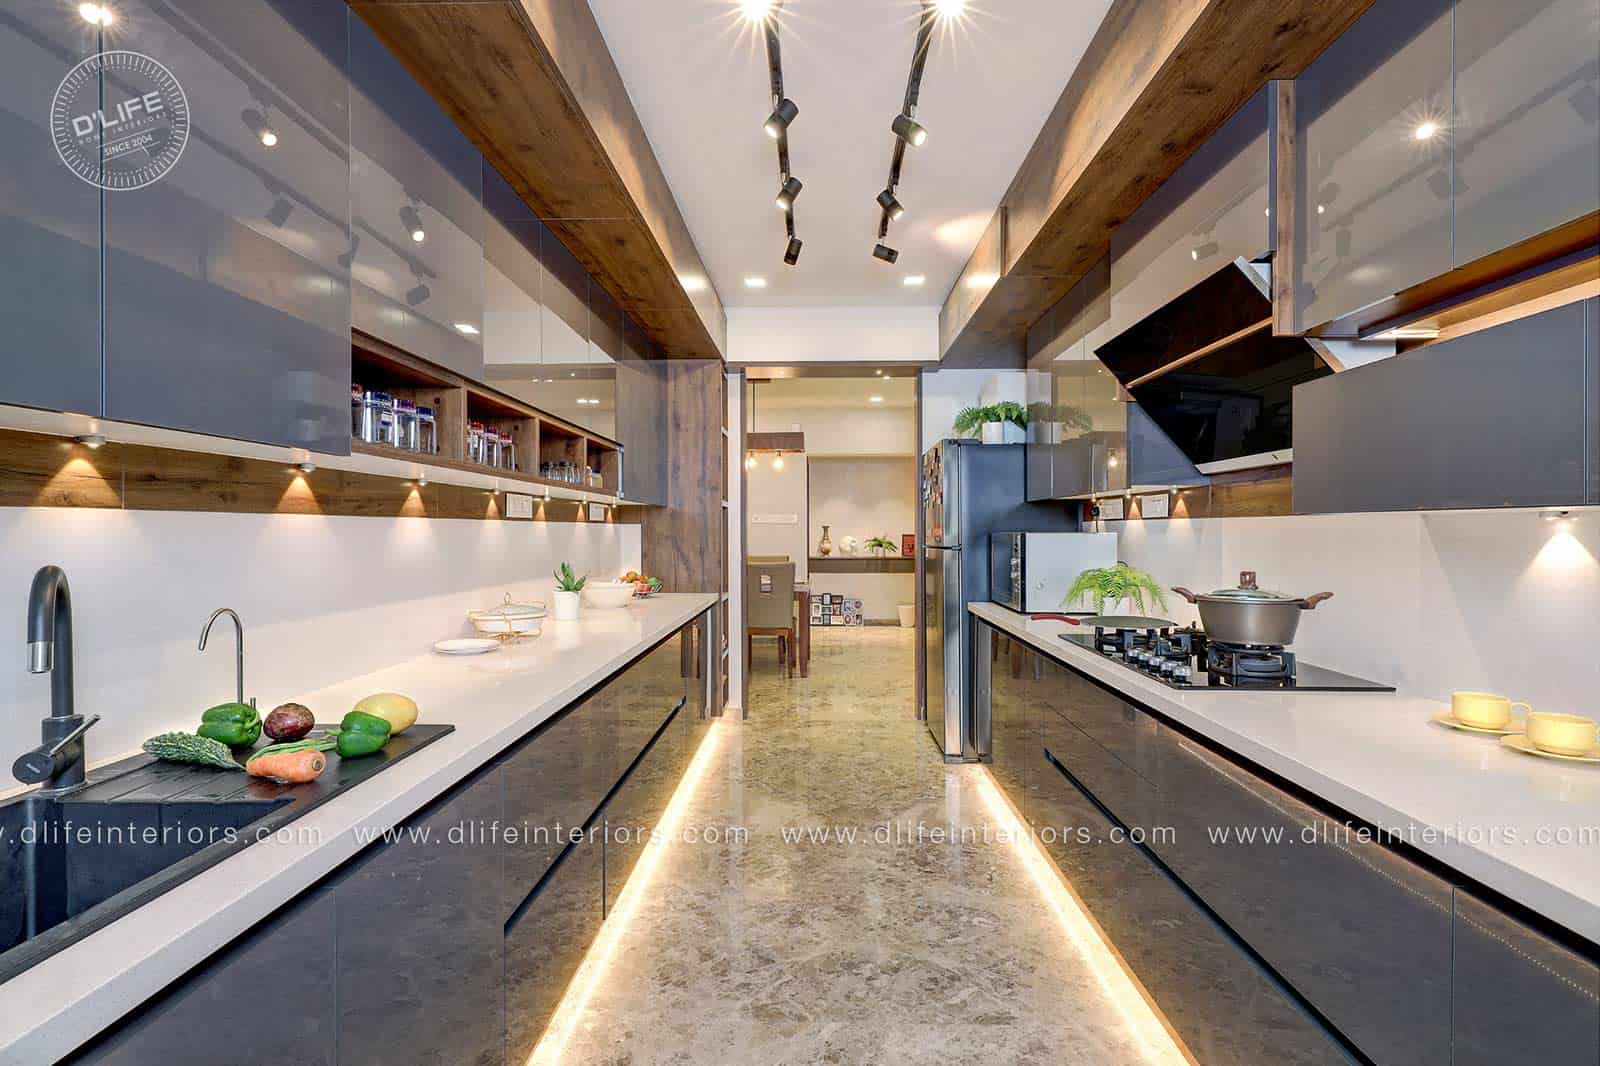 grey and white kitchen interiors with lights, washbasin and utensils